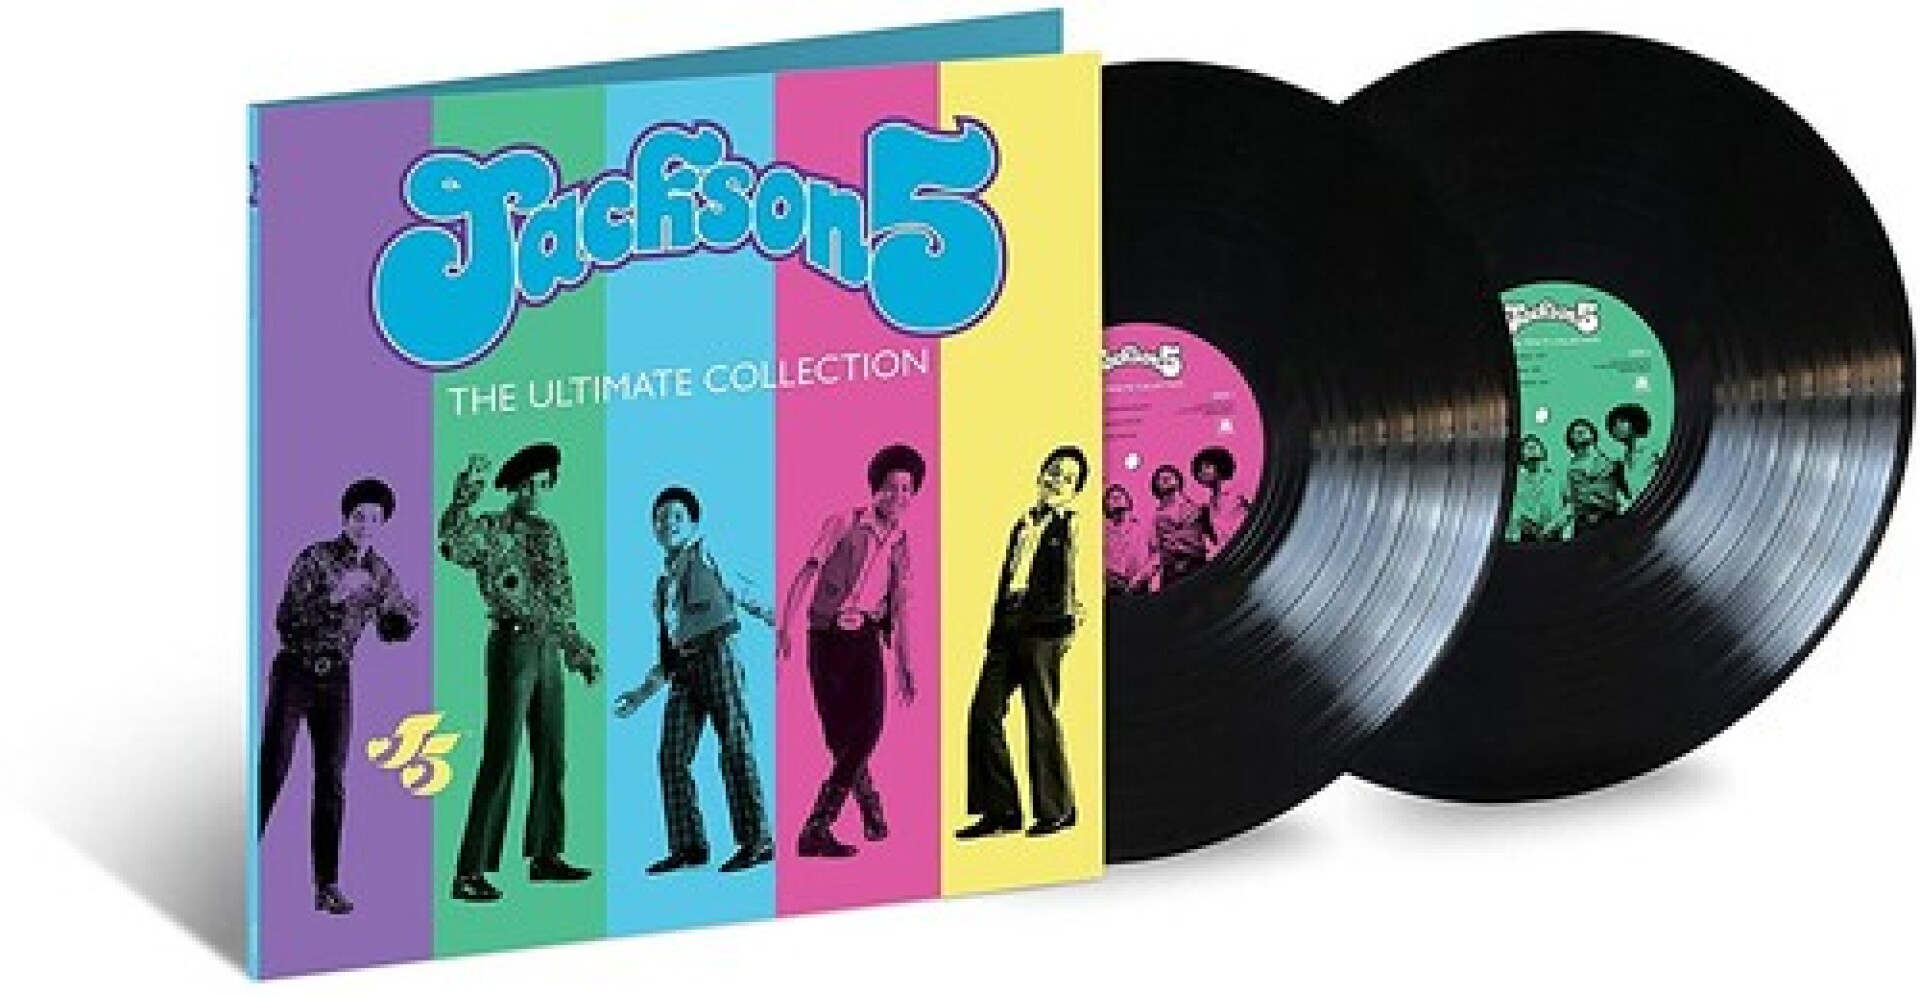 Jackson 5 - Ultimate Collection 